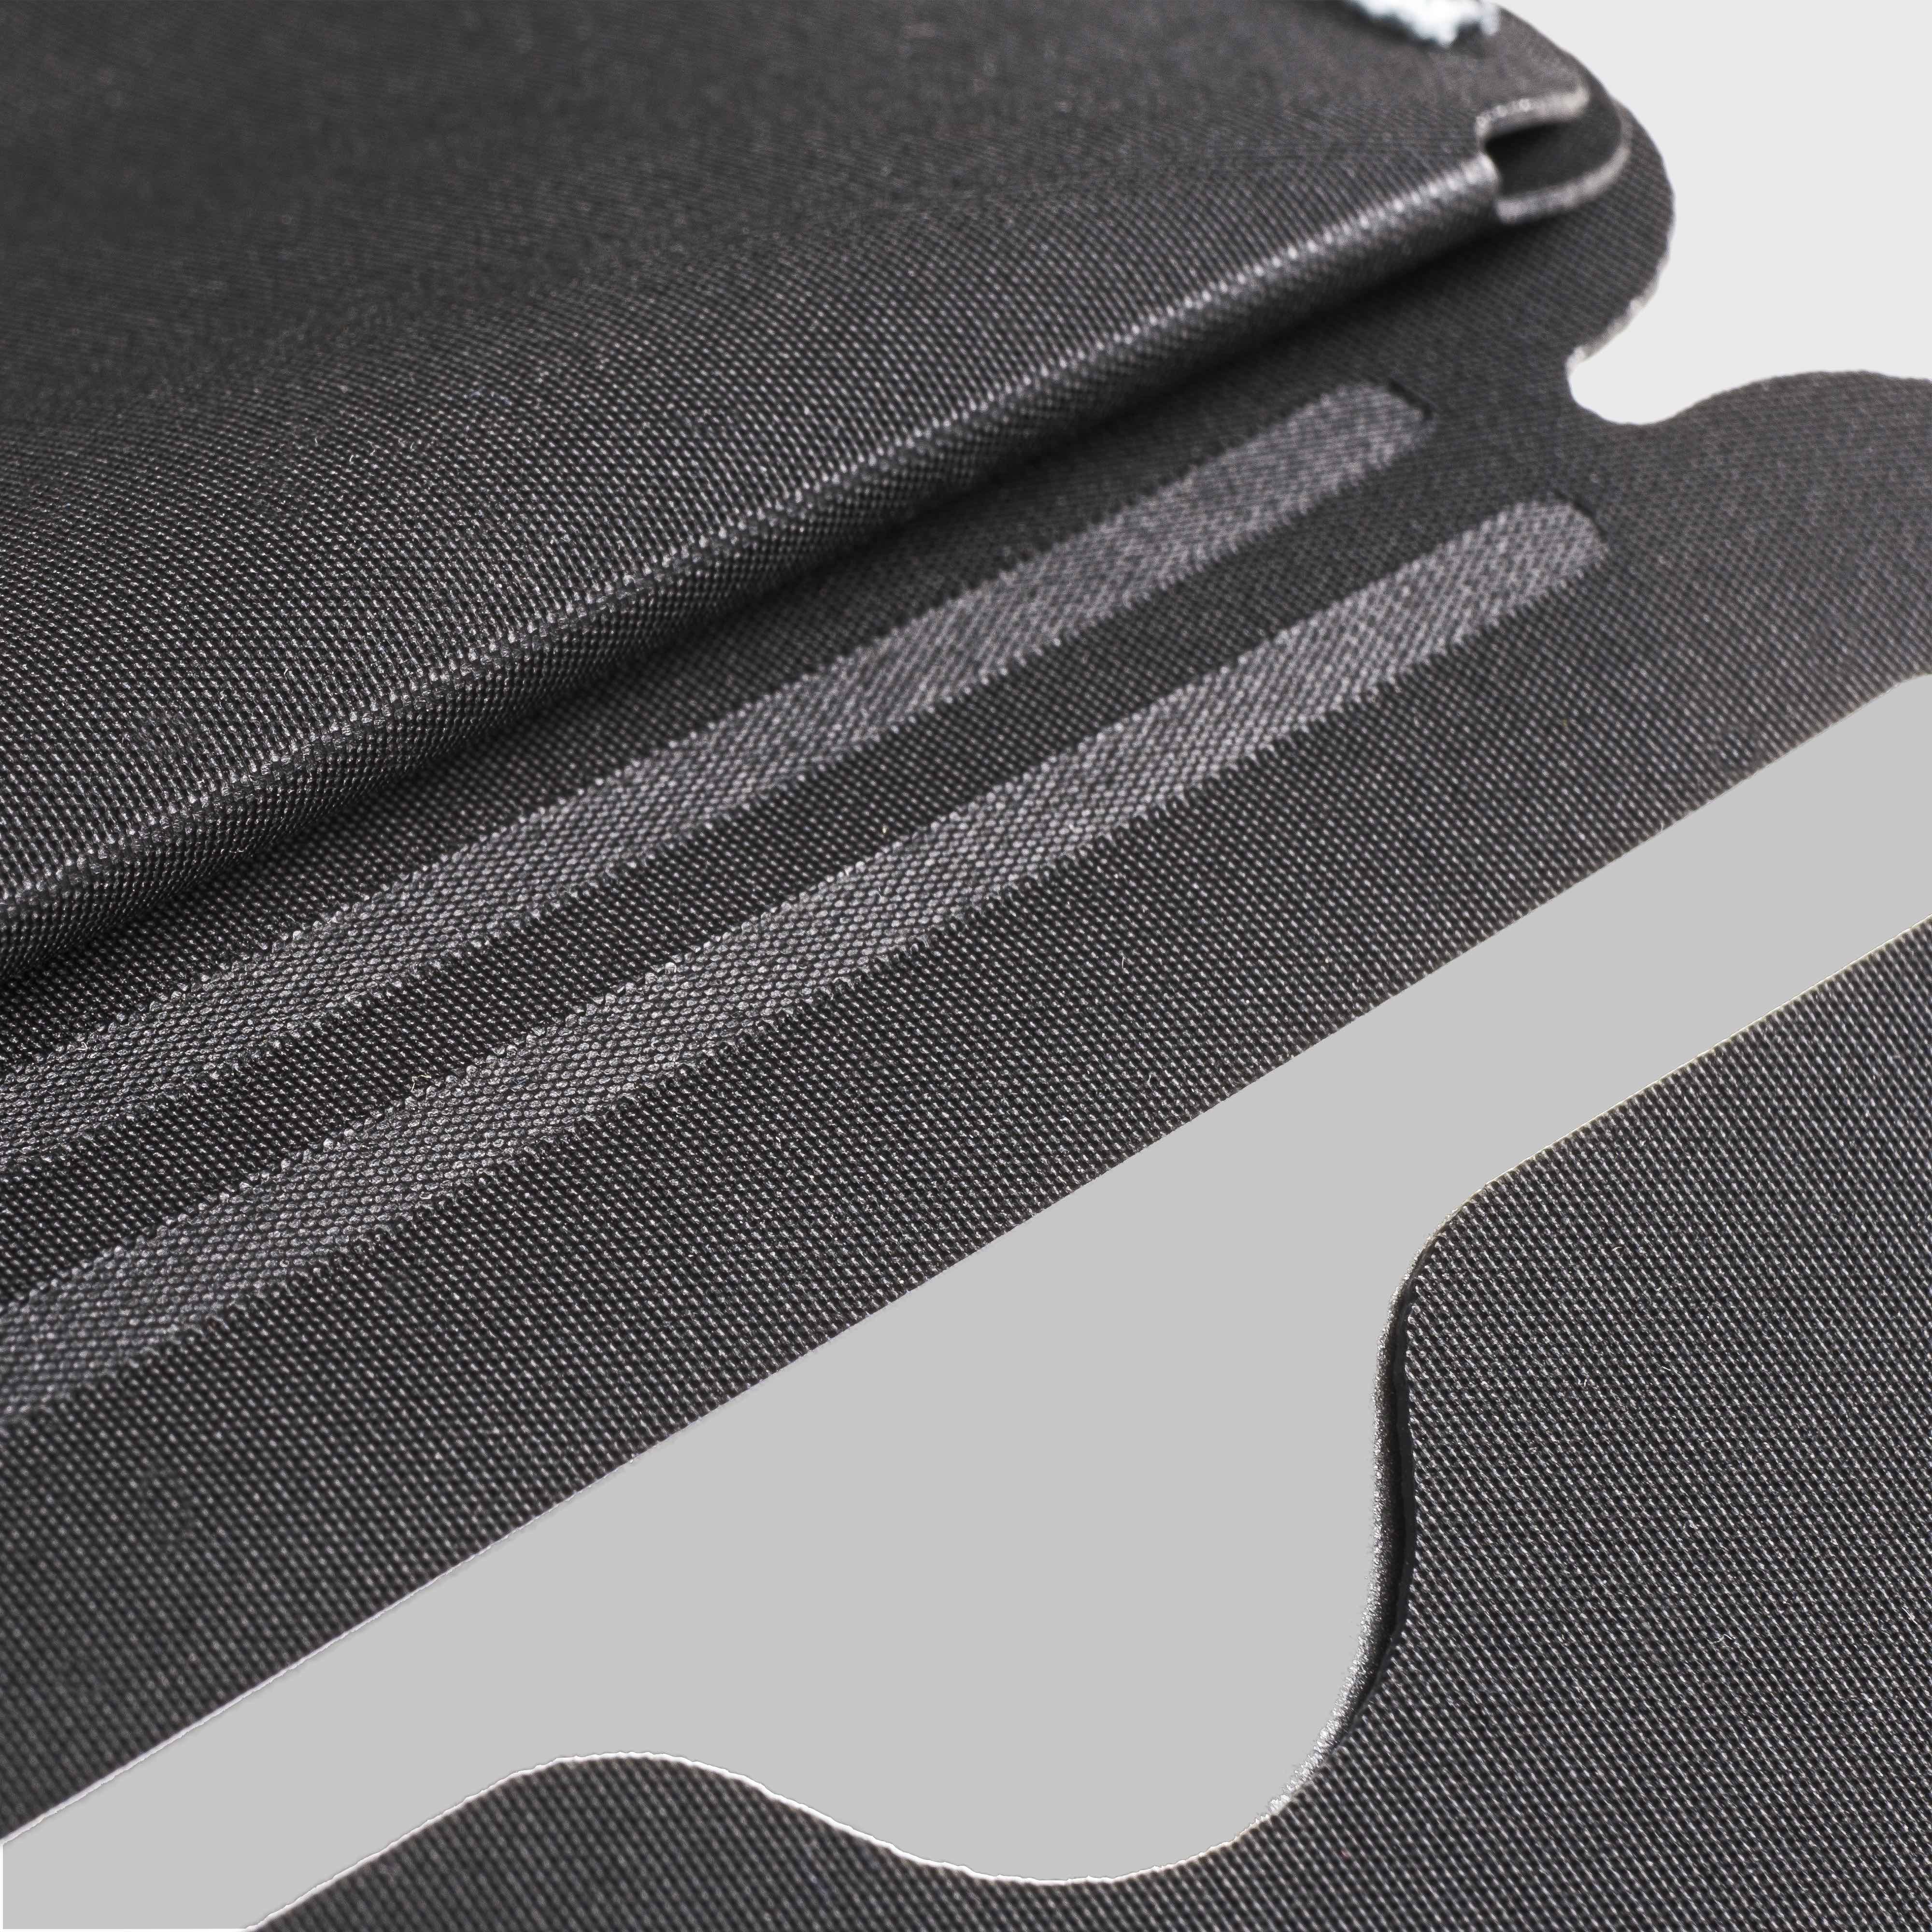 Welded Seams and Precise Lasercut add to RE:FORMs Clean and Functional Design